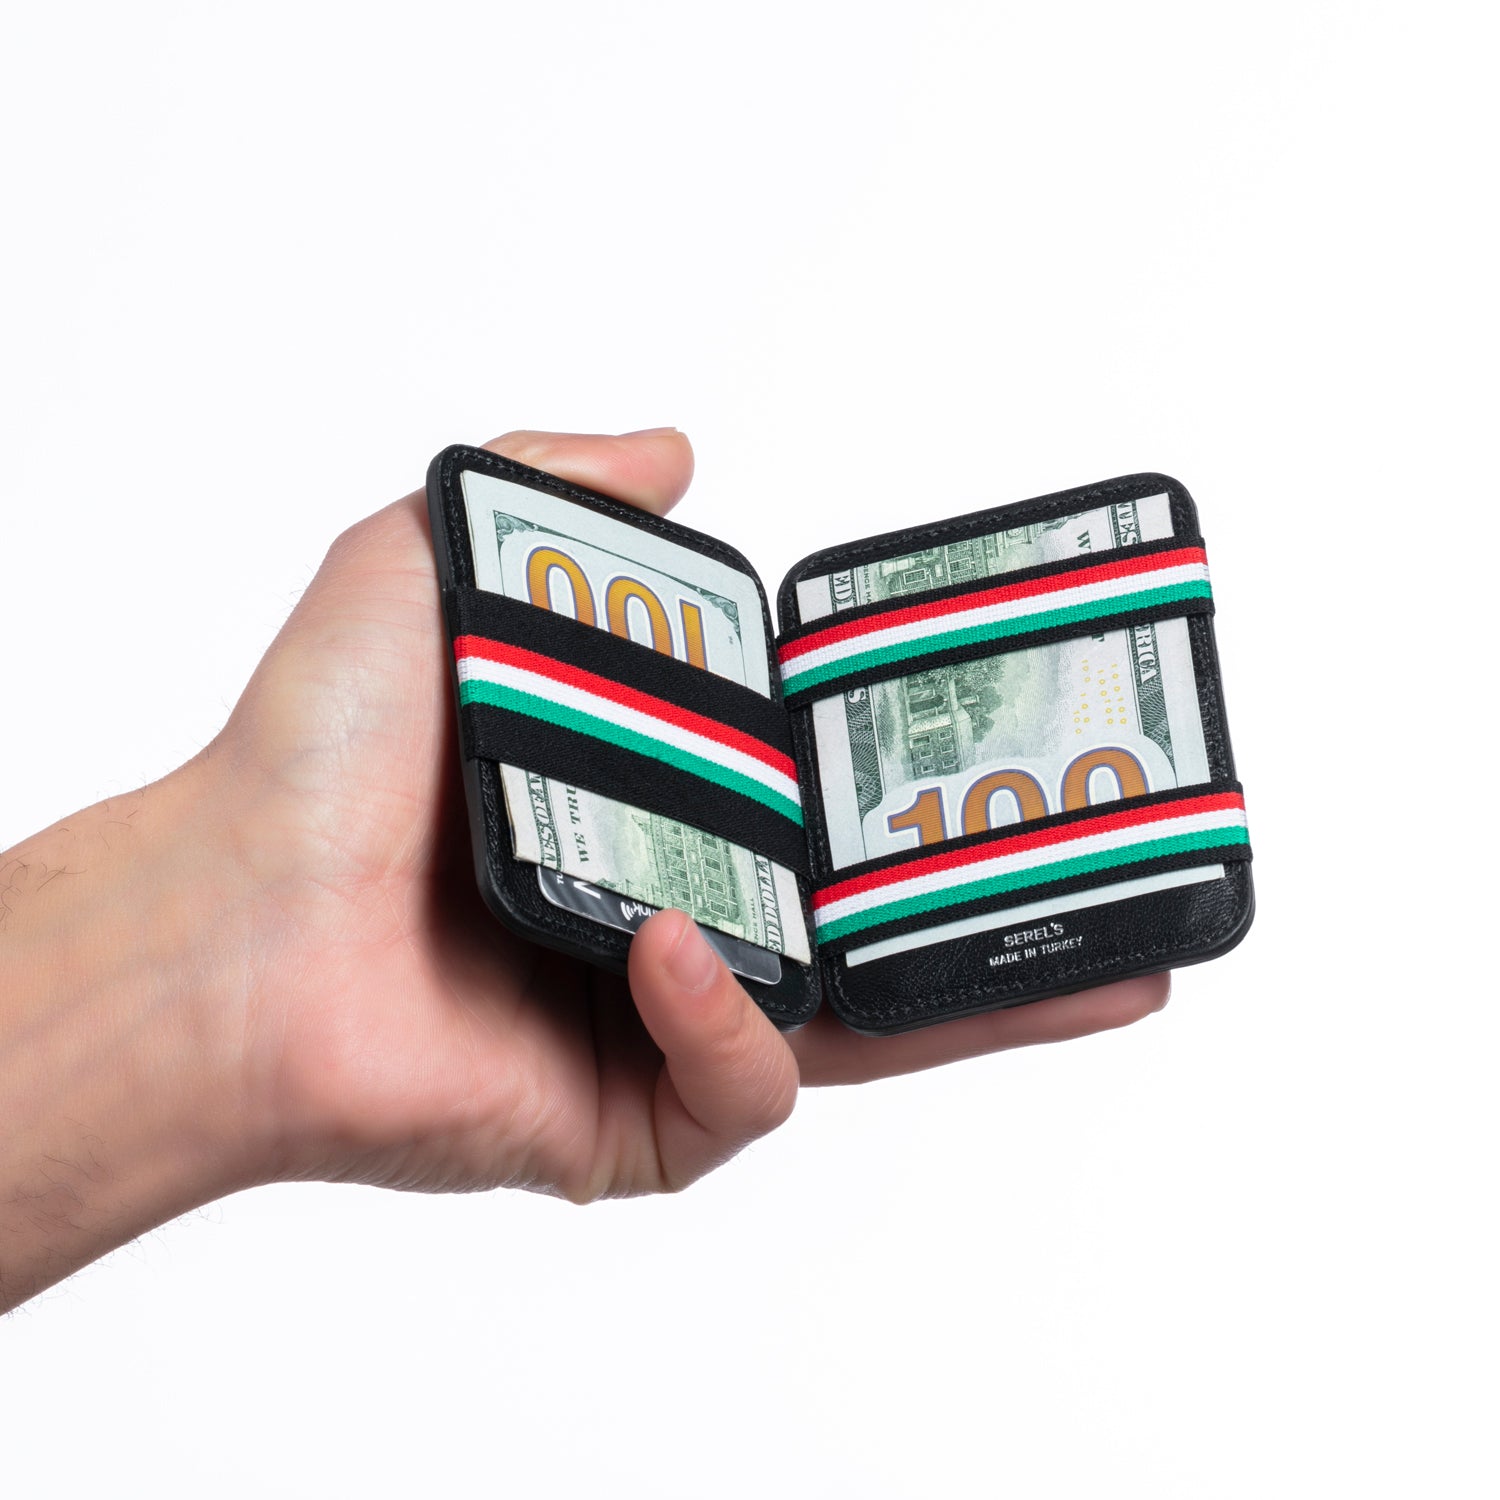 Serel's Magic X Wallet in the palm